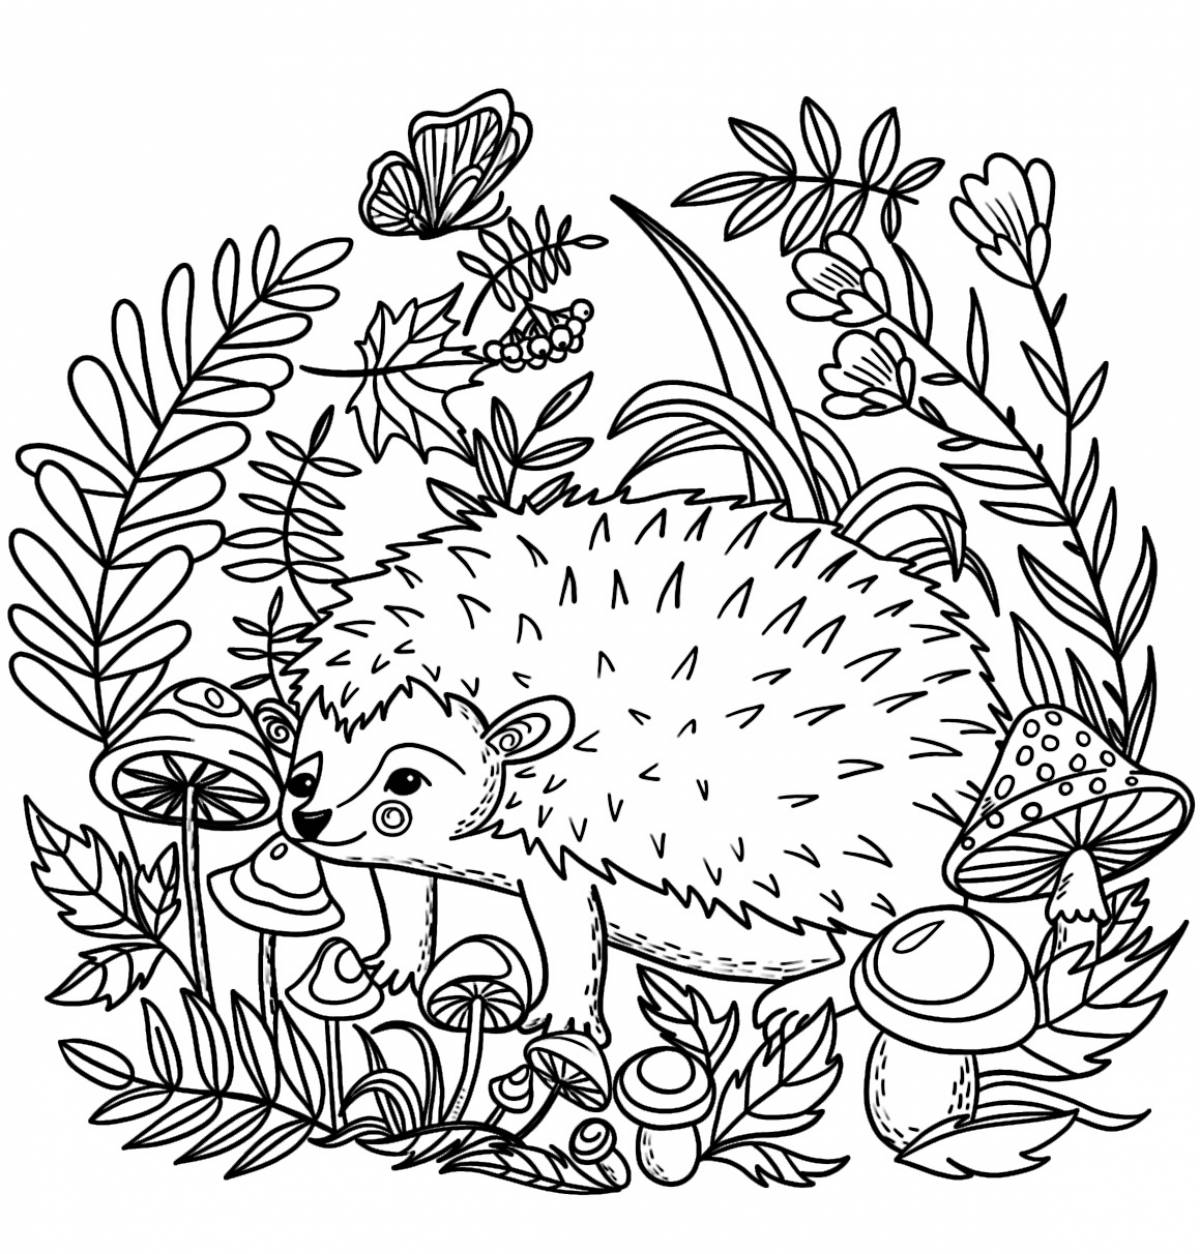 Hedgehog in the forest #3